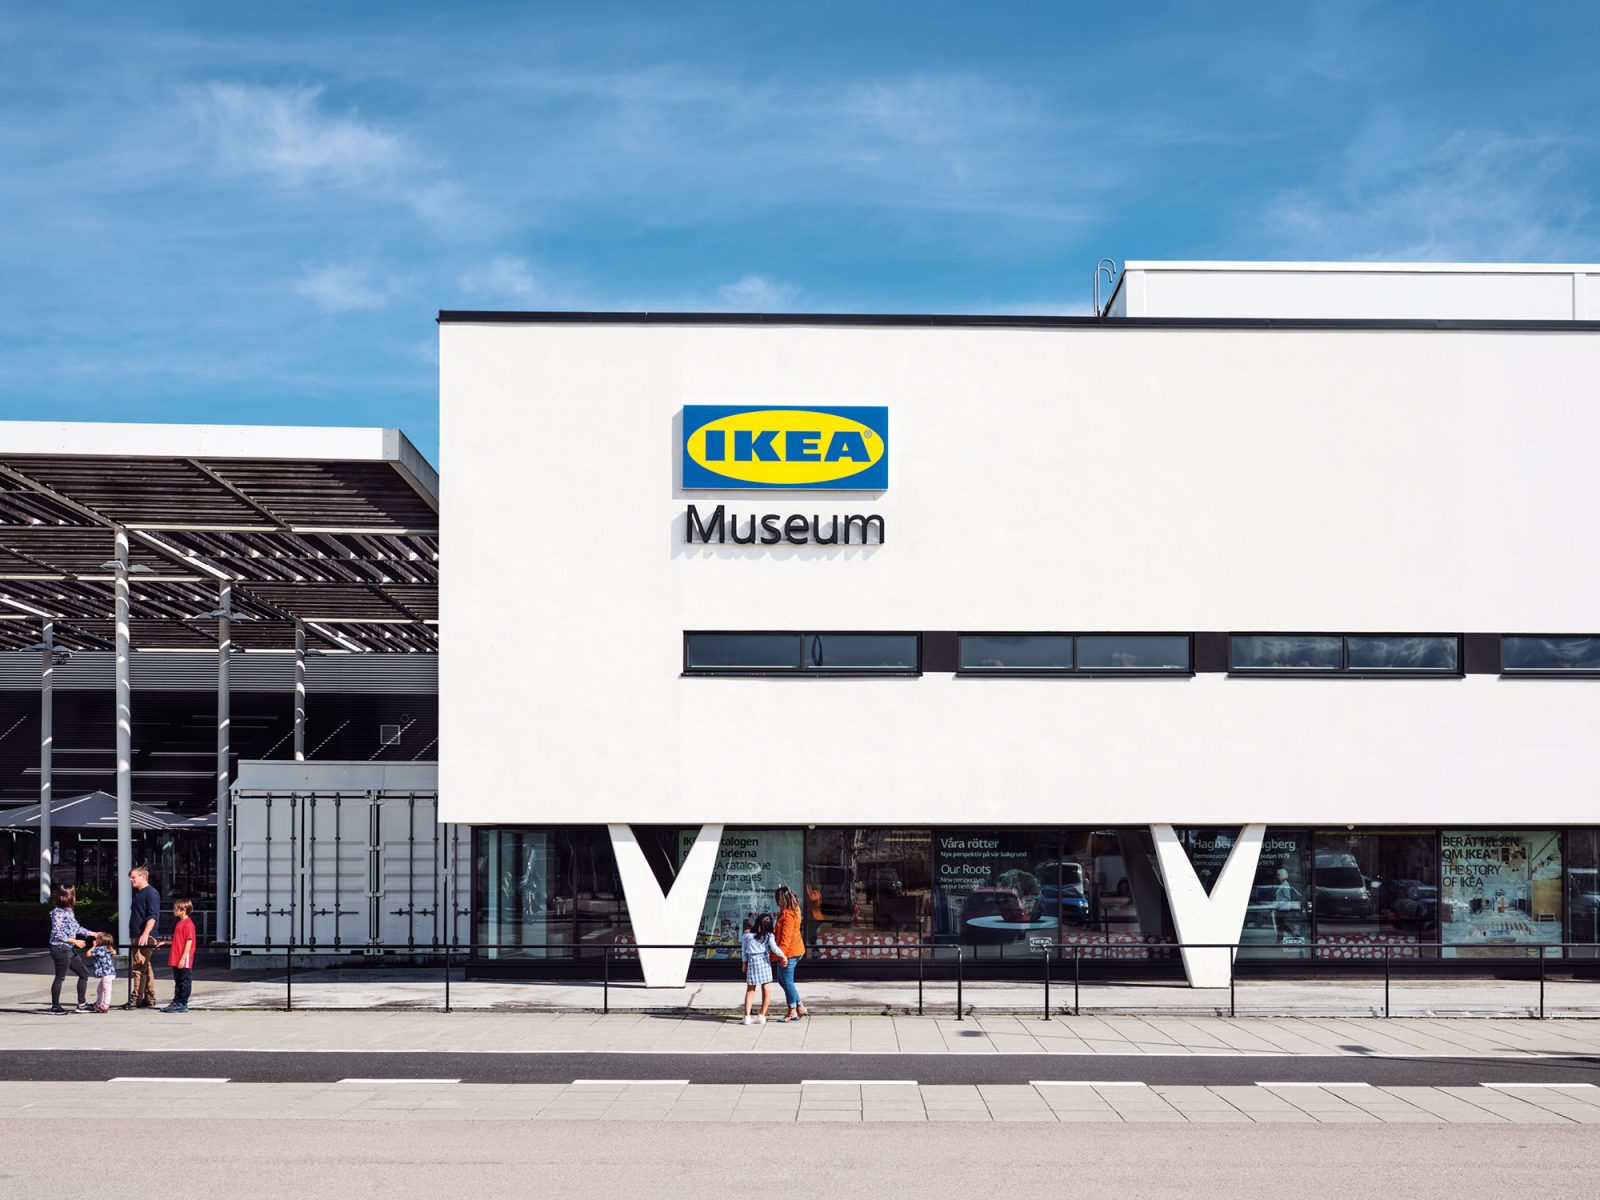 People stand in front of white building with clean lines and v-shaped pillars, sign on facade says IKEA Museum.